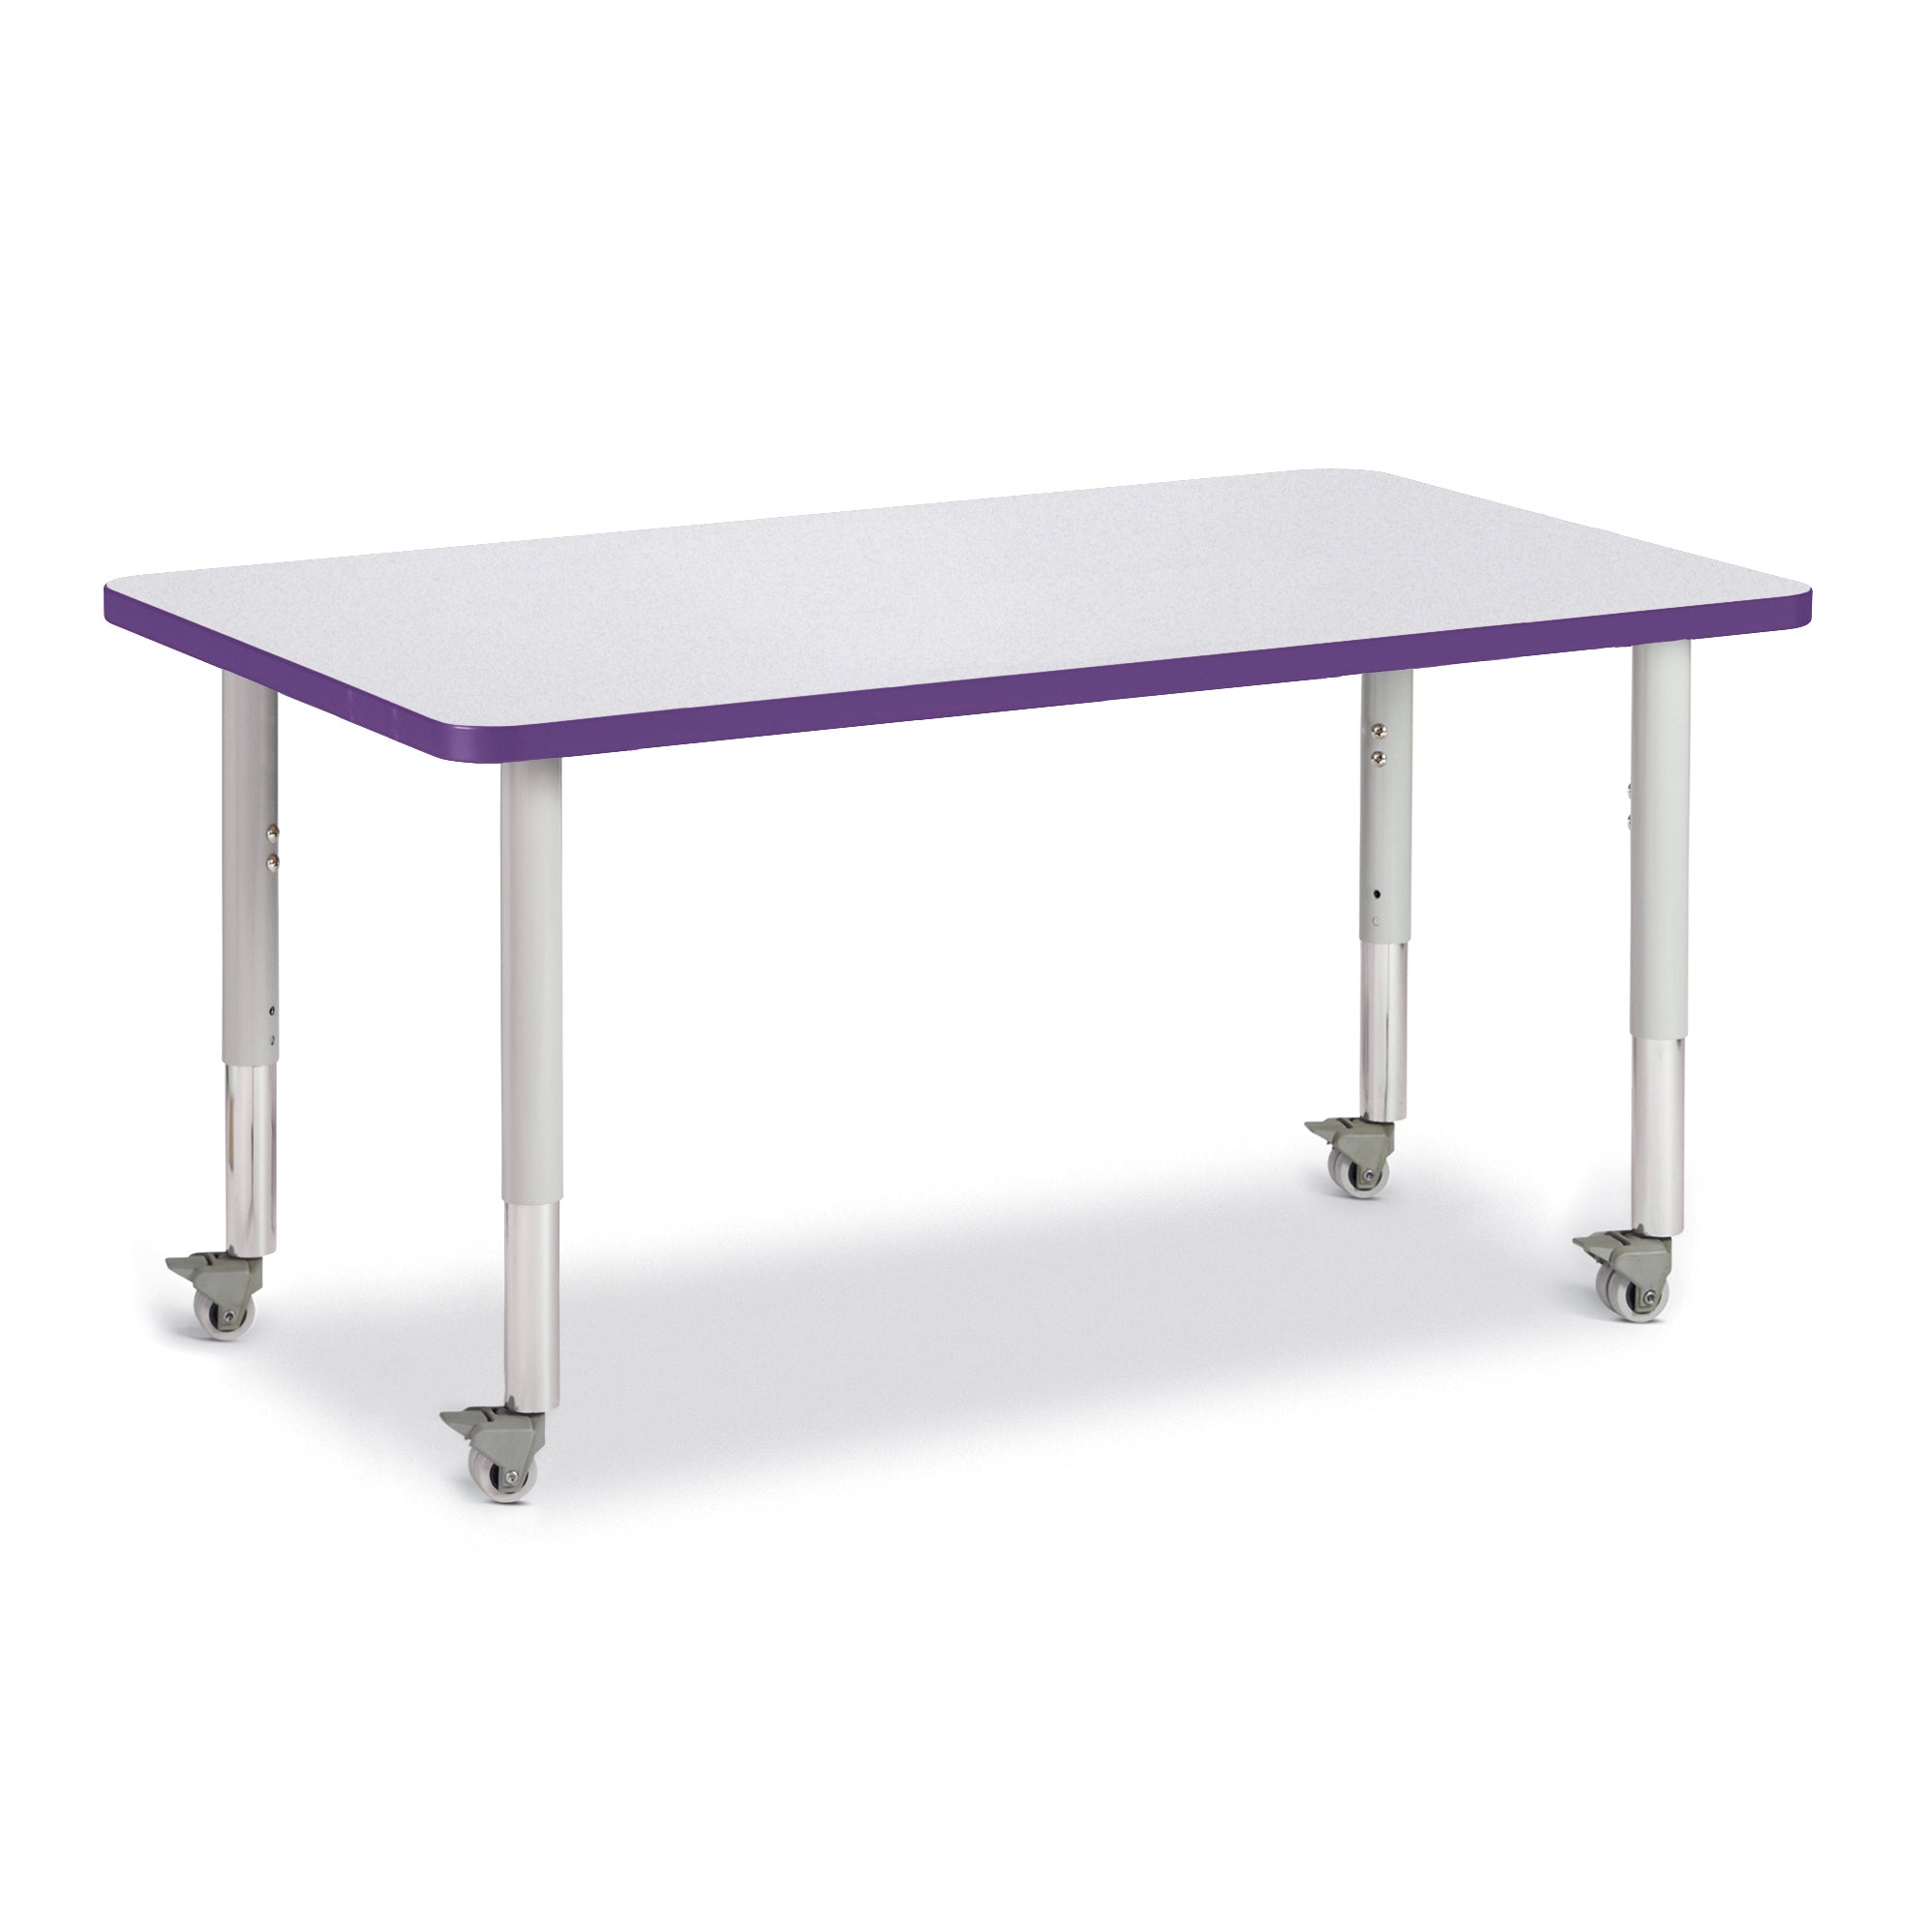 6473JCM004, Berries Rectangle Activity Table - 30" X 48", Mobile - Freckled Gray/Purple/Gray